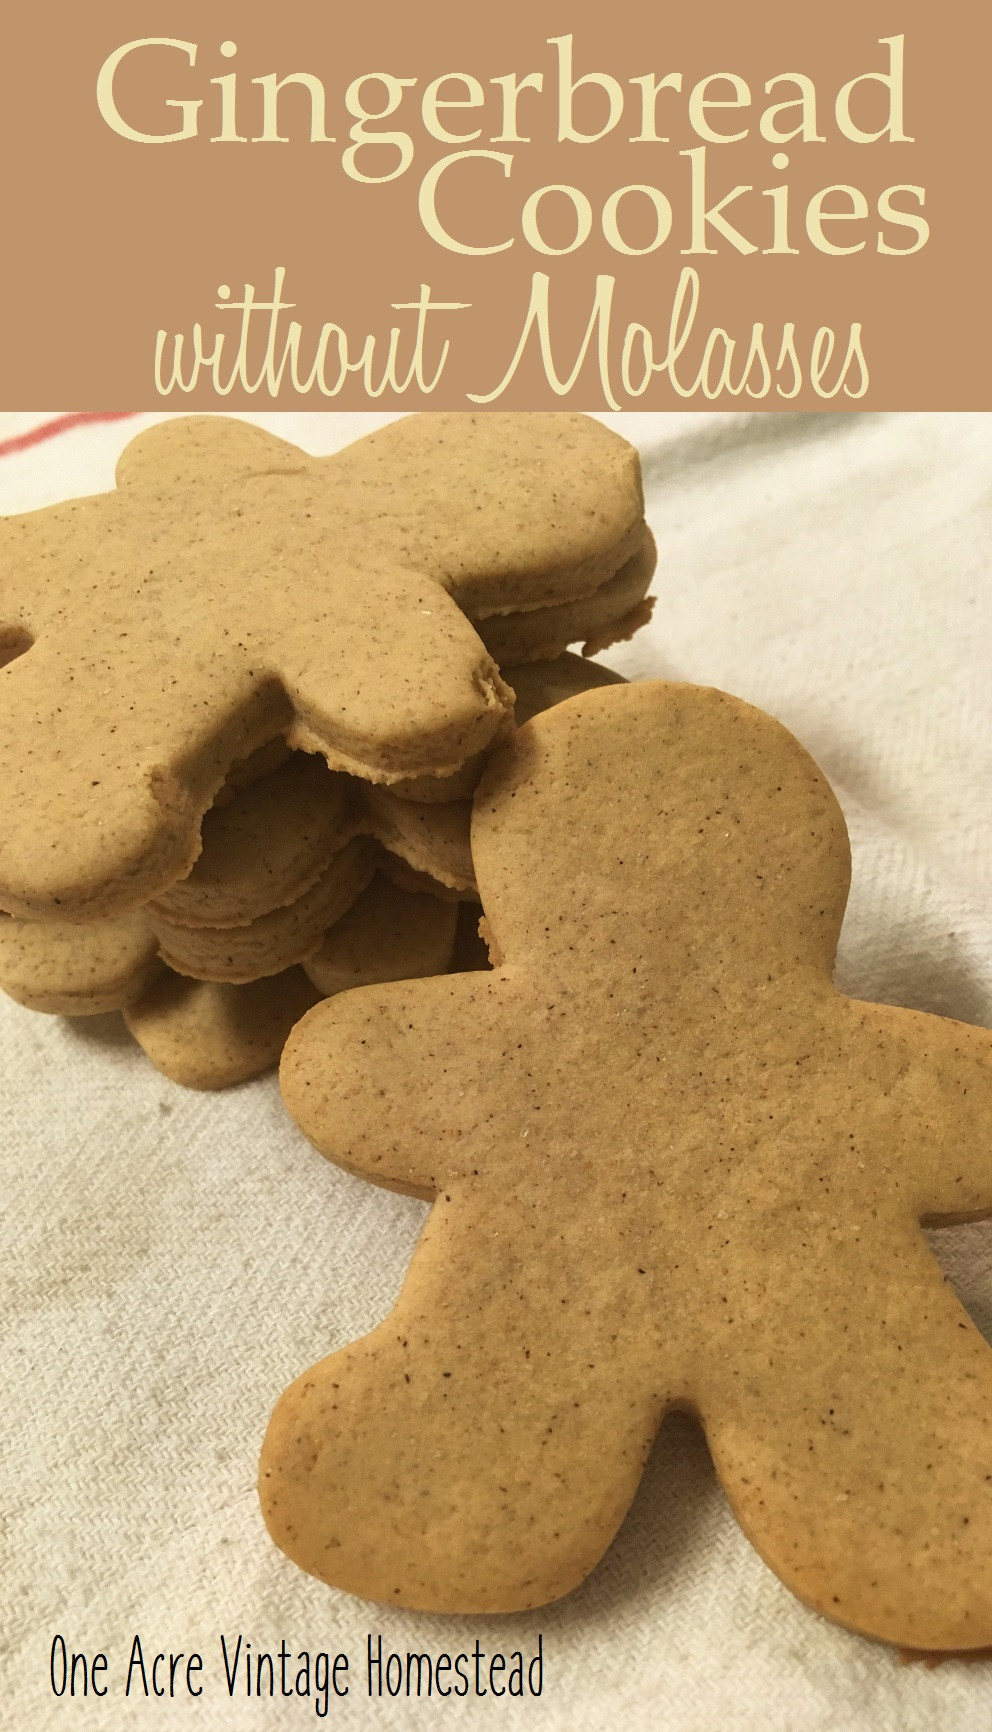 Delicious Gingerbread Cookies without Molasses